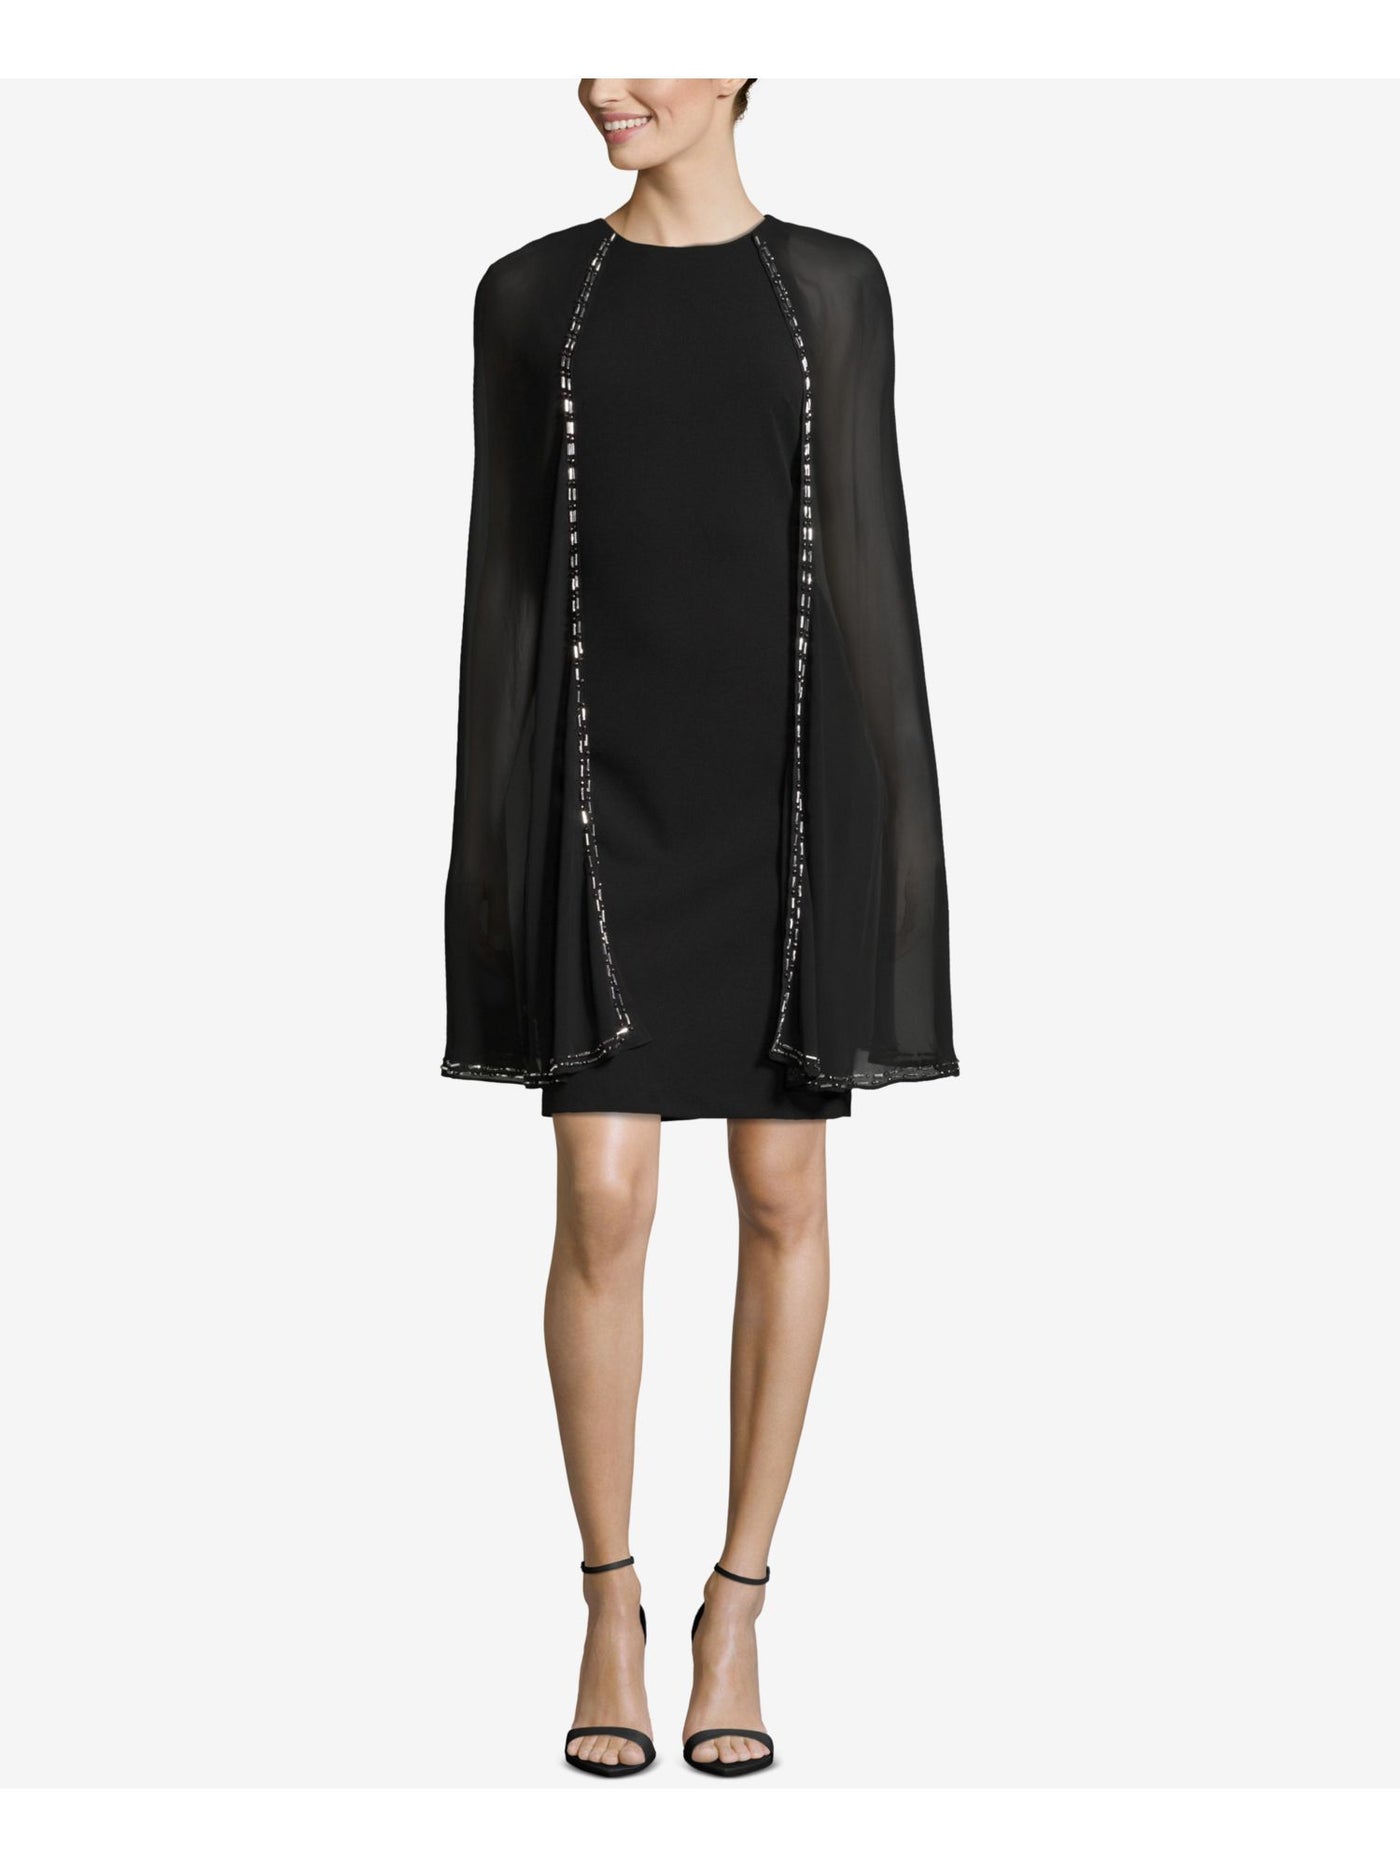 BETSY & ADAM Womens Black Embellished Sleeveless Above The Knee Cocktail Shift Dress Petites 4